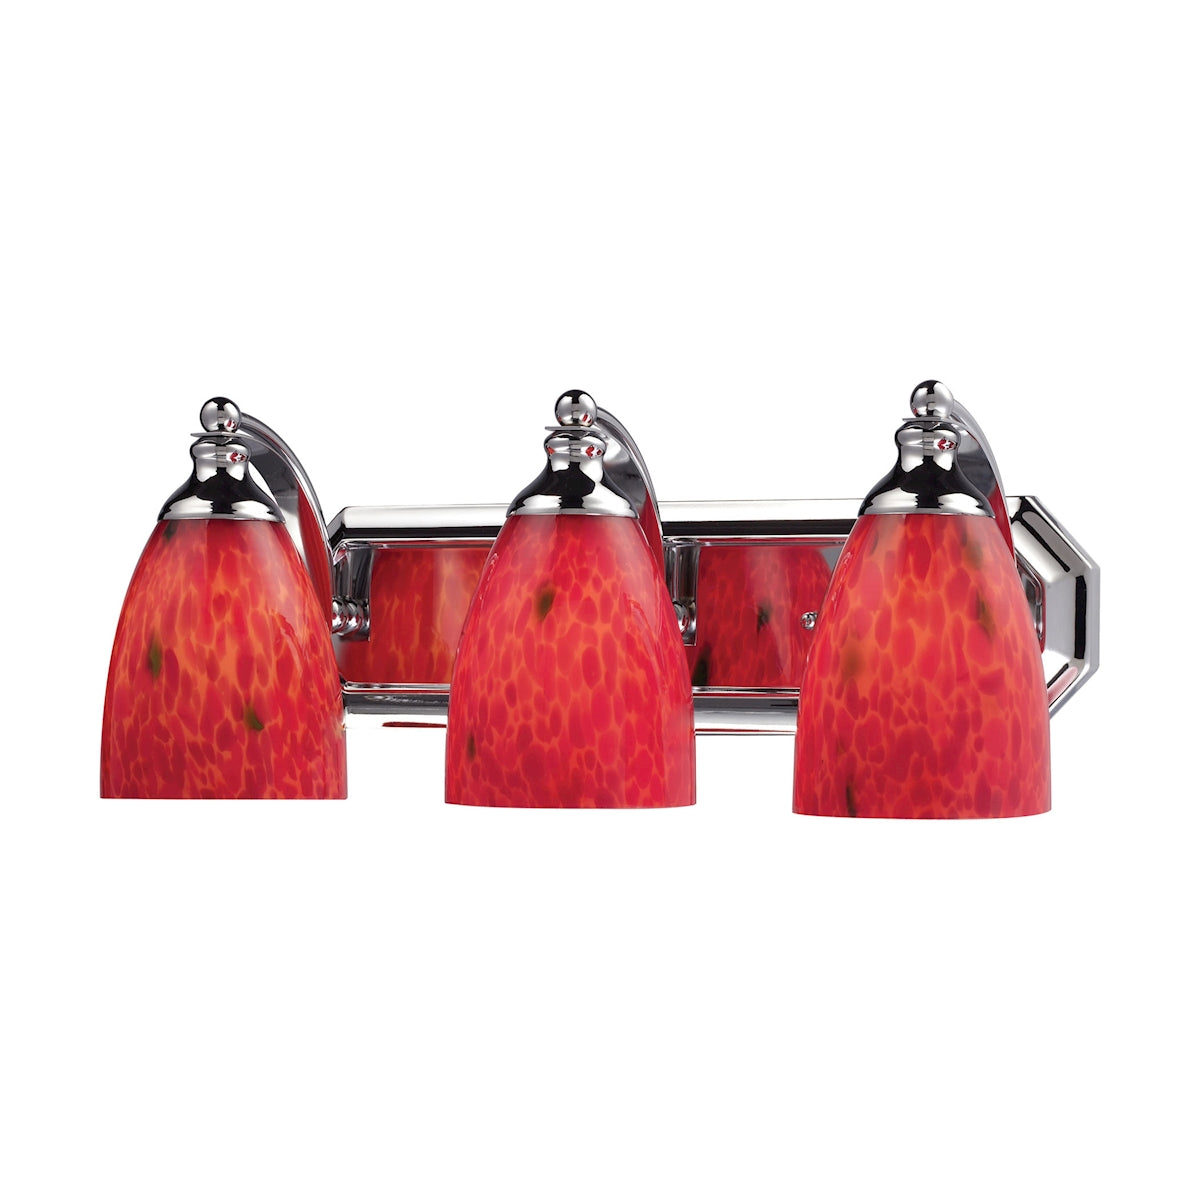 ELK Lighting 570-3C-FR Mix and Match Vanity 3-Light Wall Lamp in Chrome with Fire Red Glass